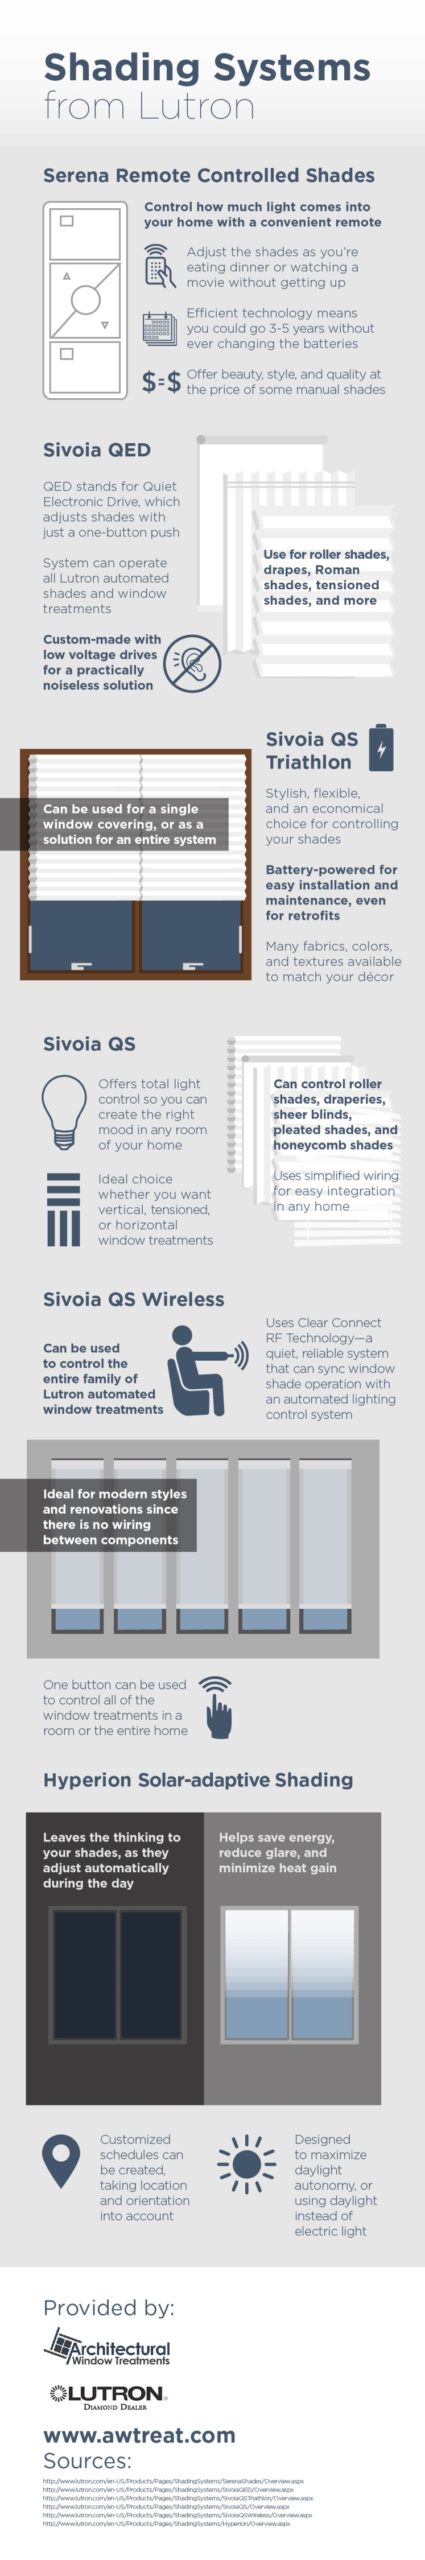 shading systems from Lutron - Infographic